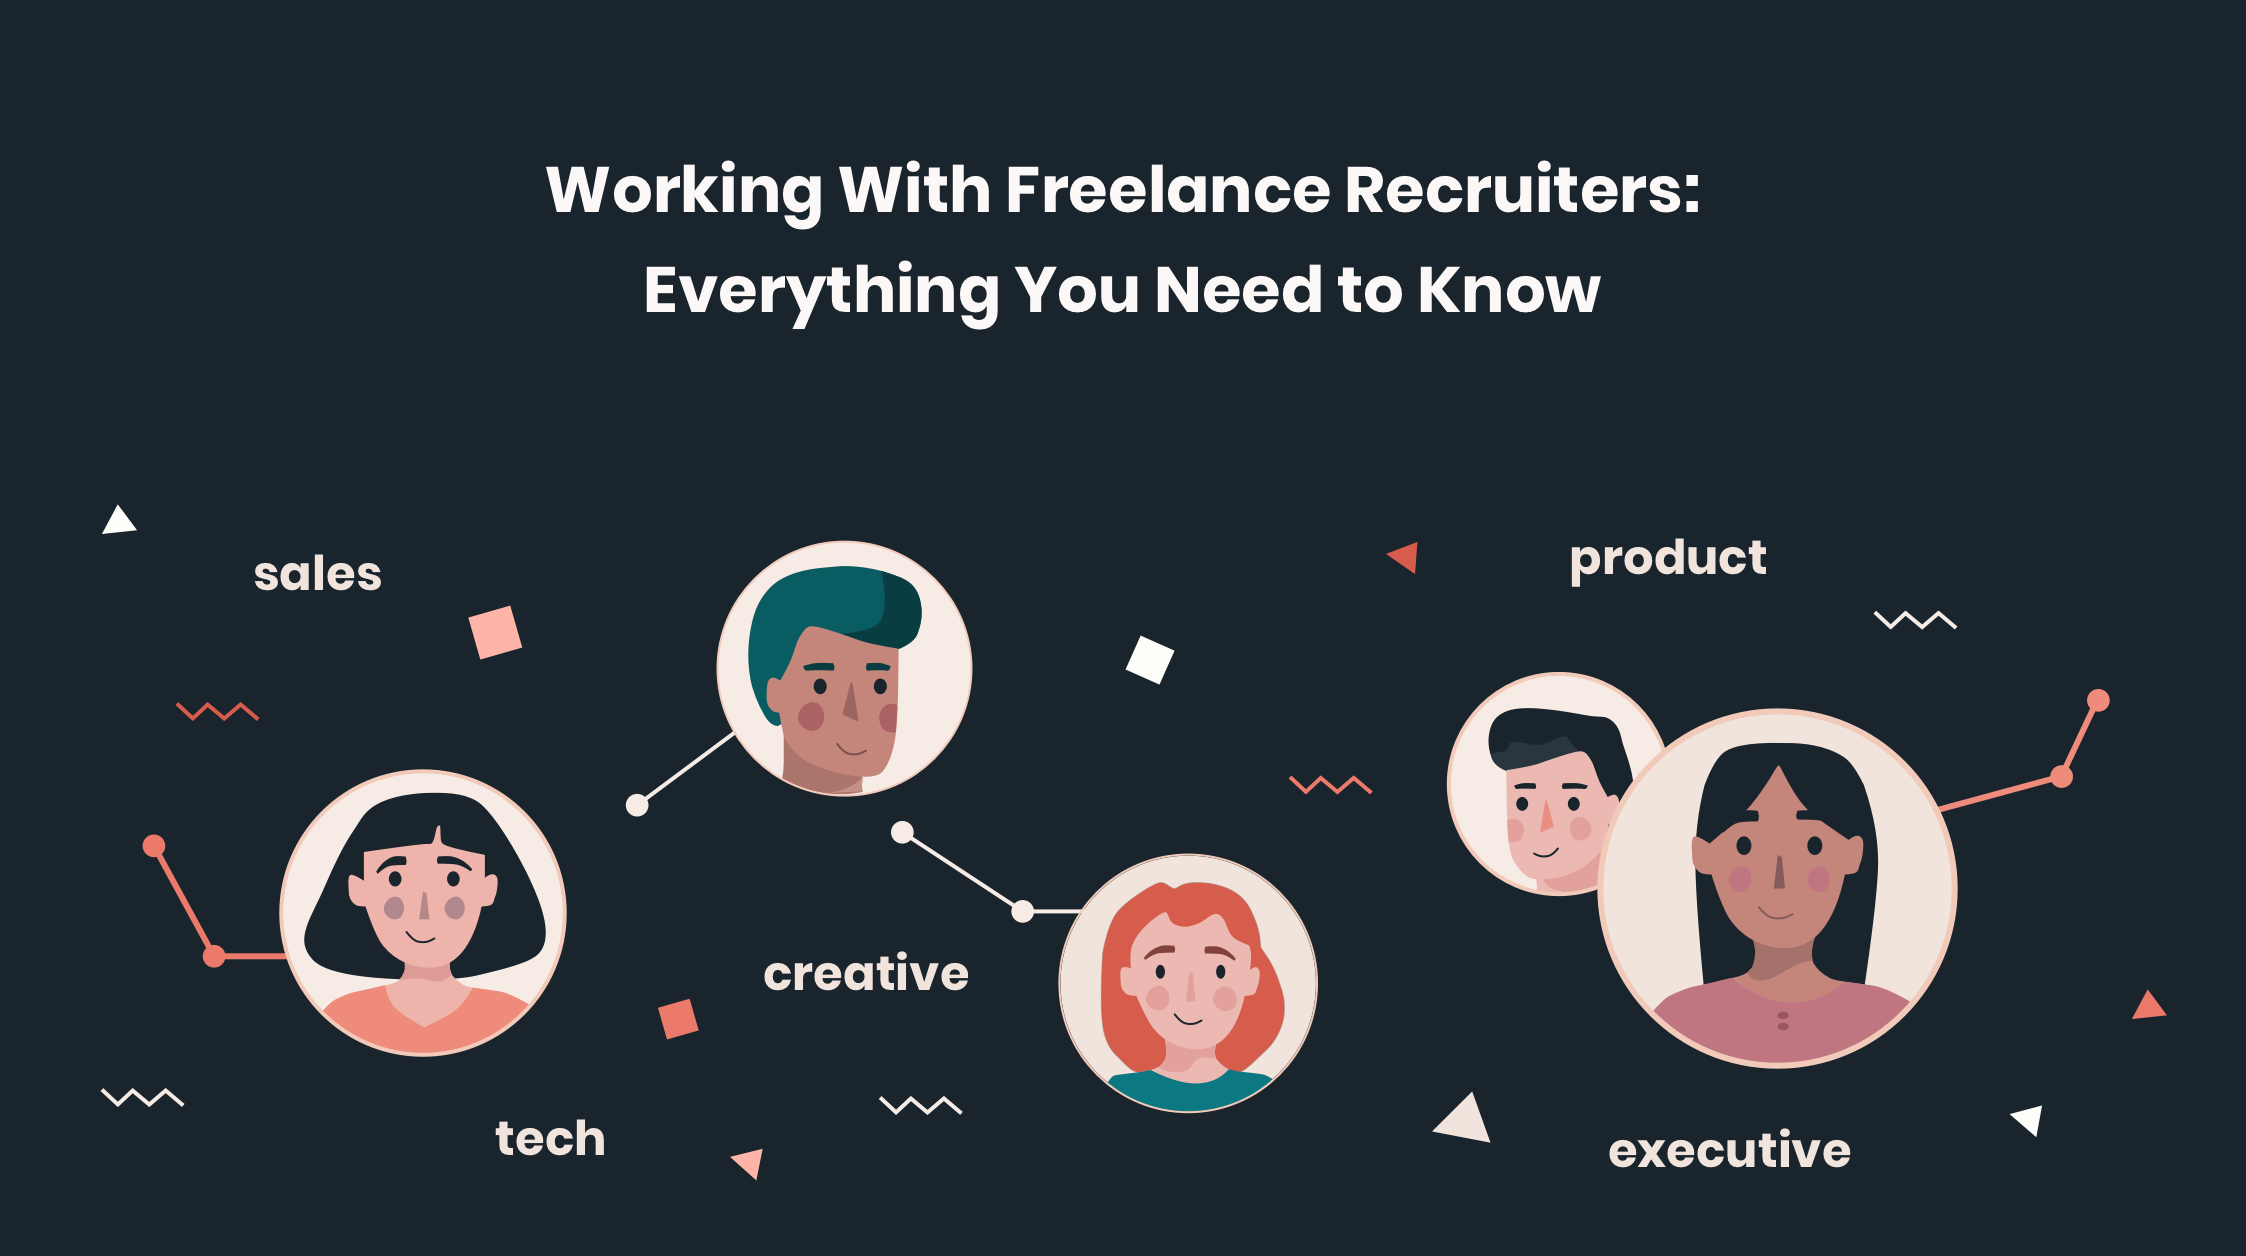 Working With Freelance Recruiters: Everything You Need to Know